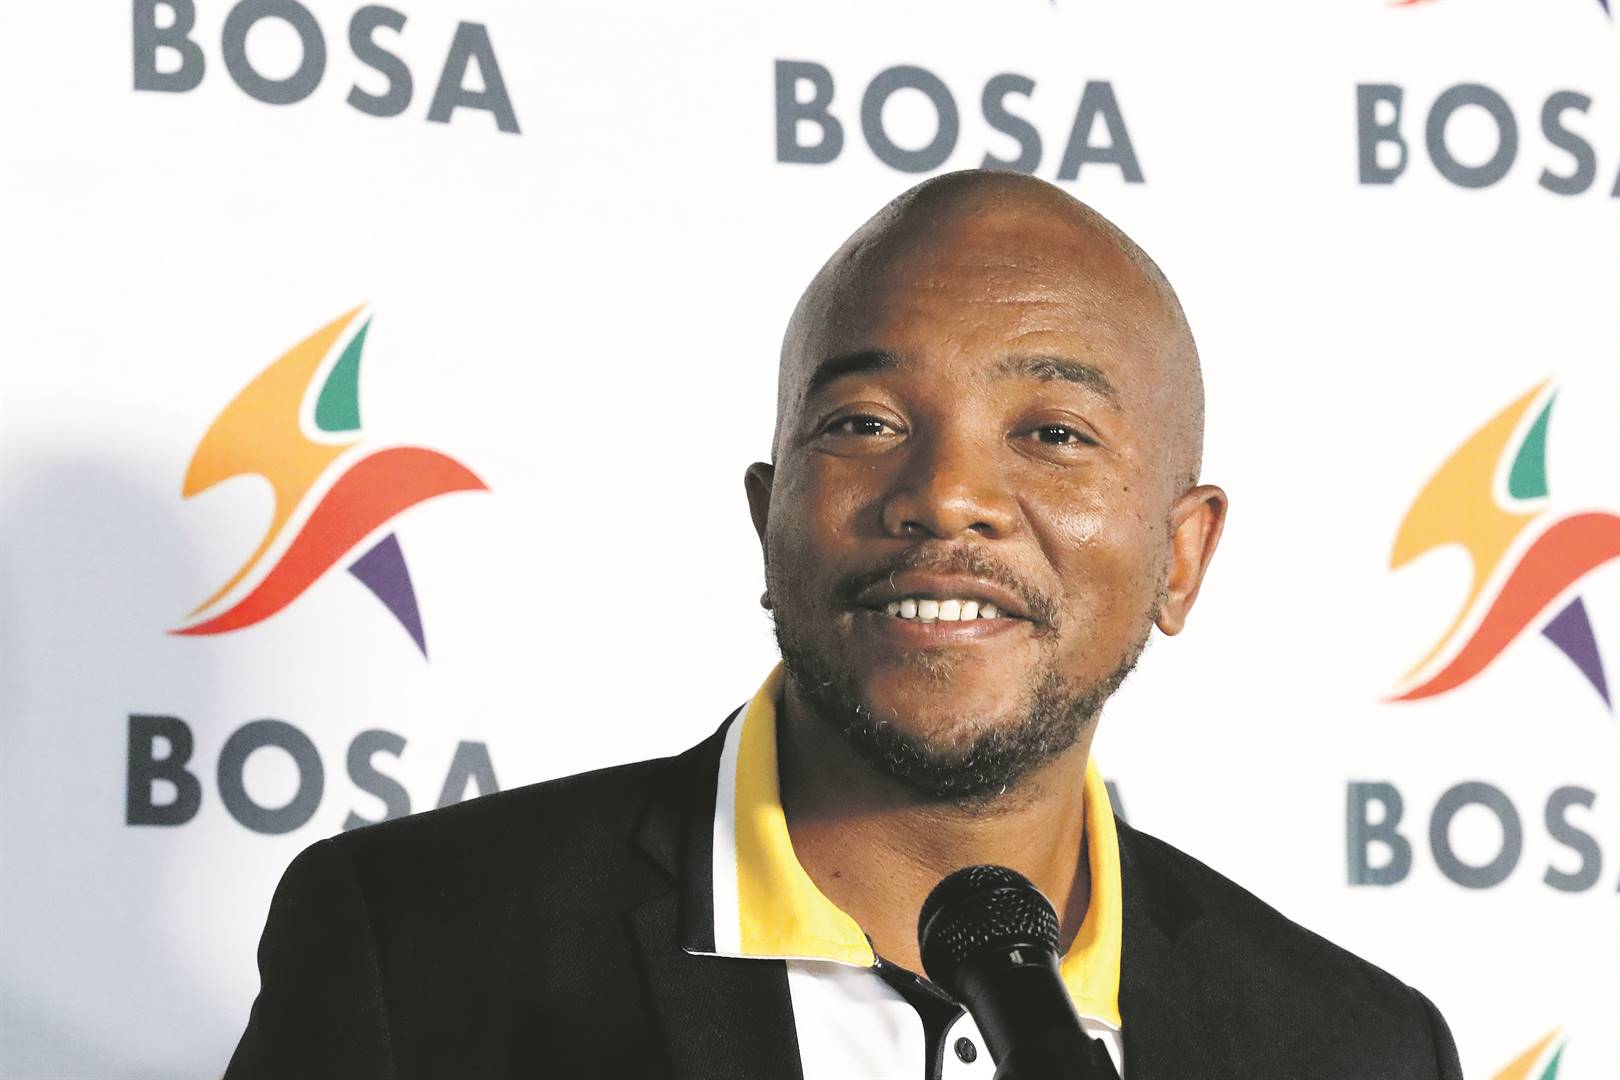 Led by Mmusi Maimane, Bosa gathers several smaller parties under one banner for a united challenge to the current ruling class